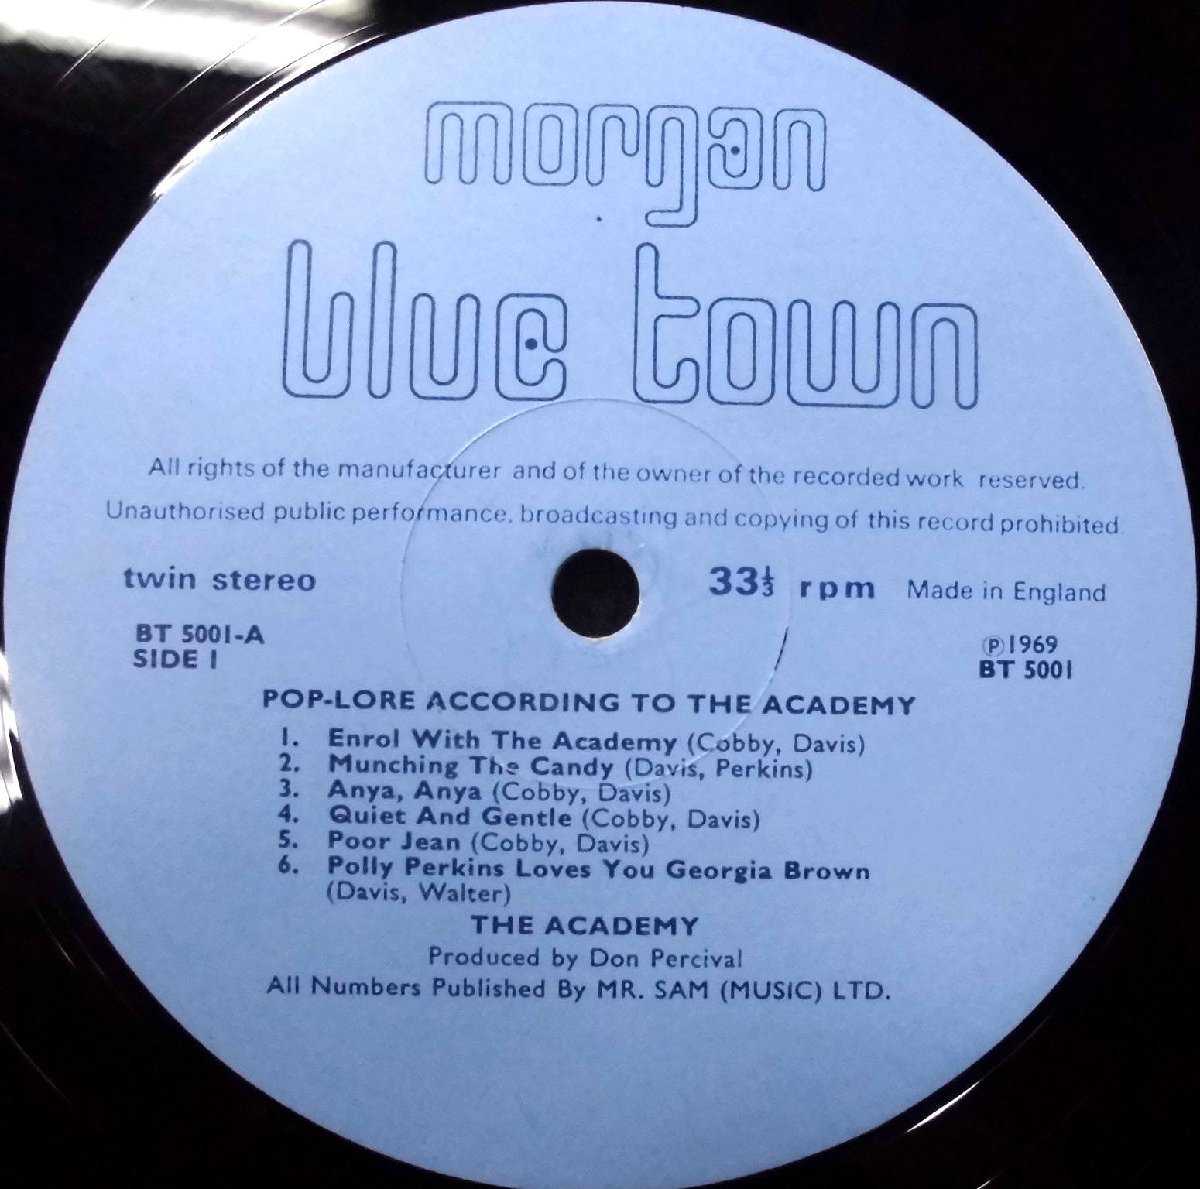 ●UK-Morgan Blue Townオリジナルw/Textured-Cover!! The Academy / Pop-Lore According To The Academyの画像7